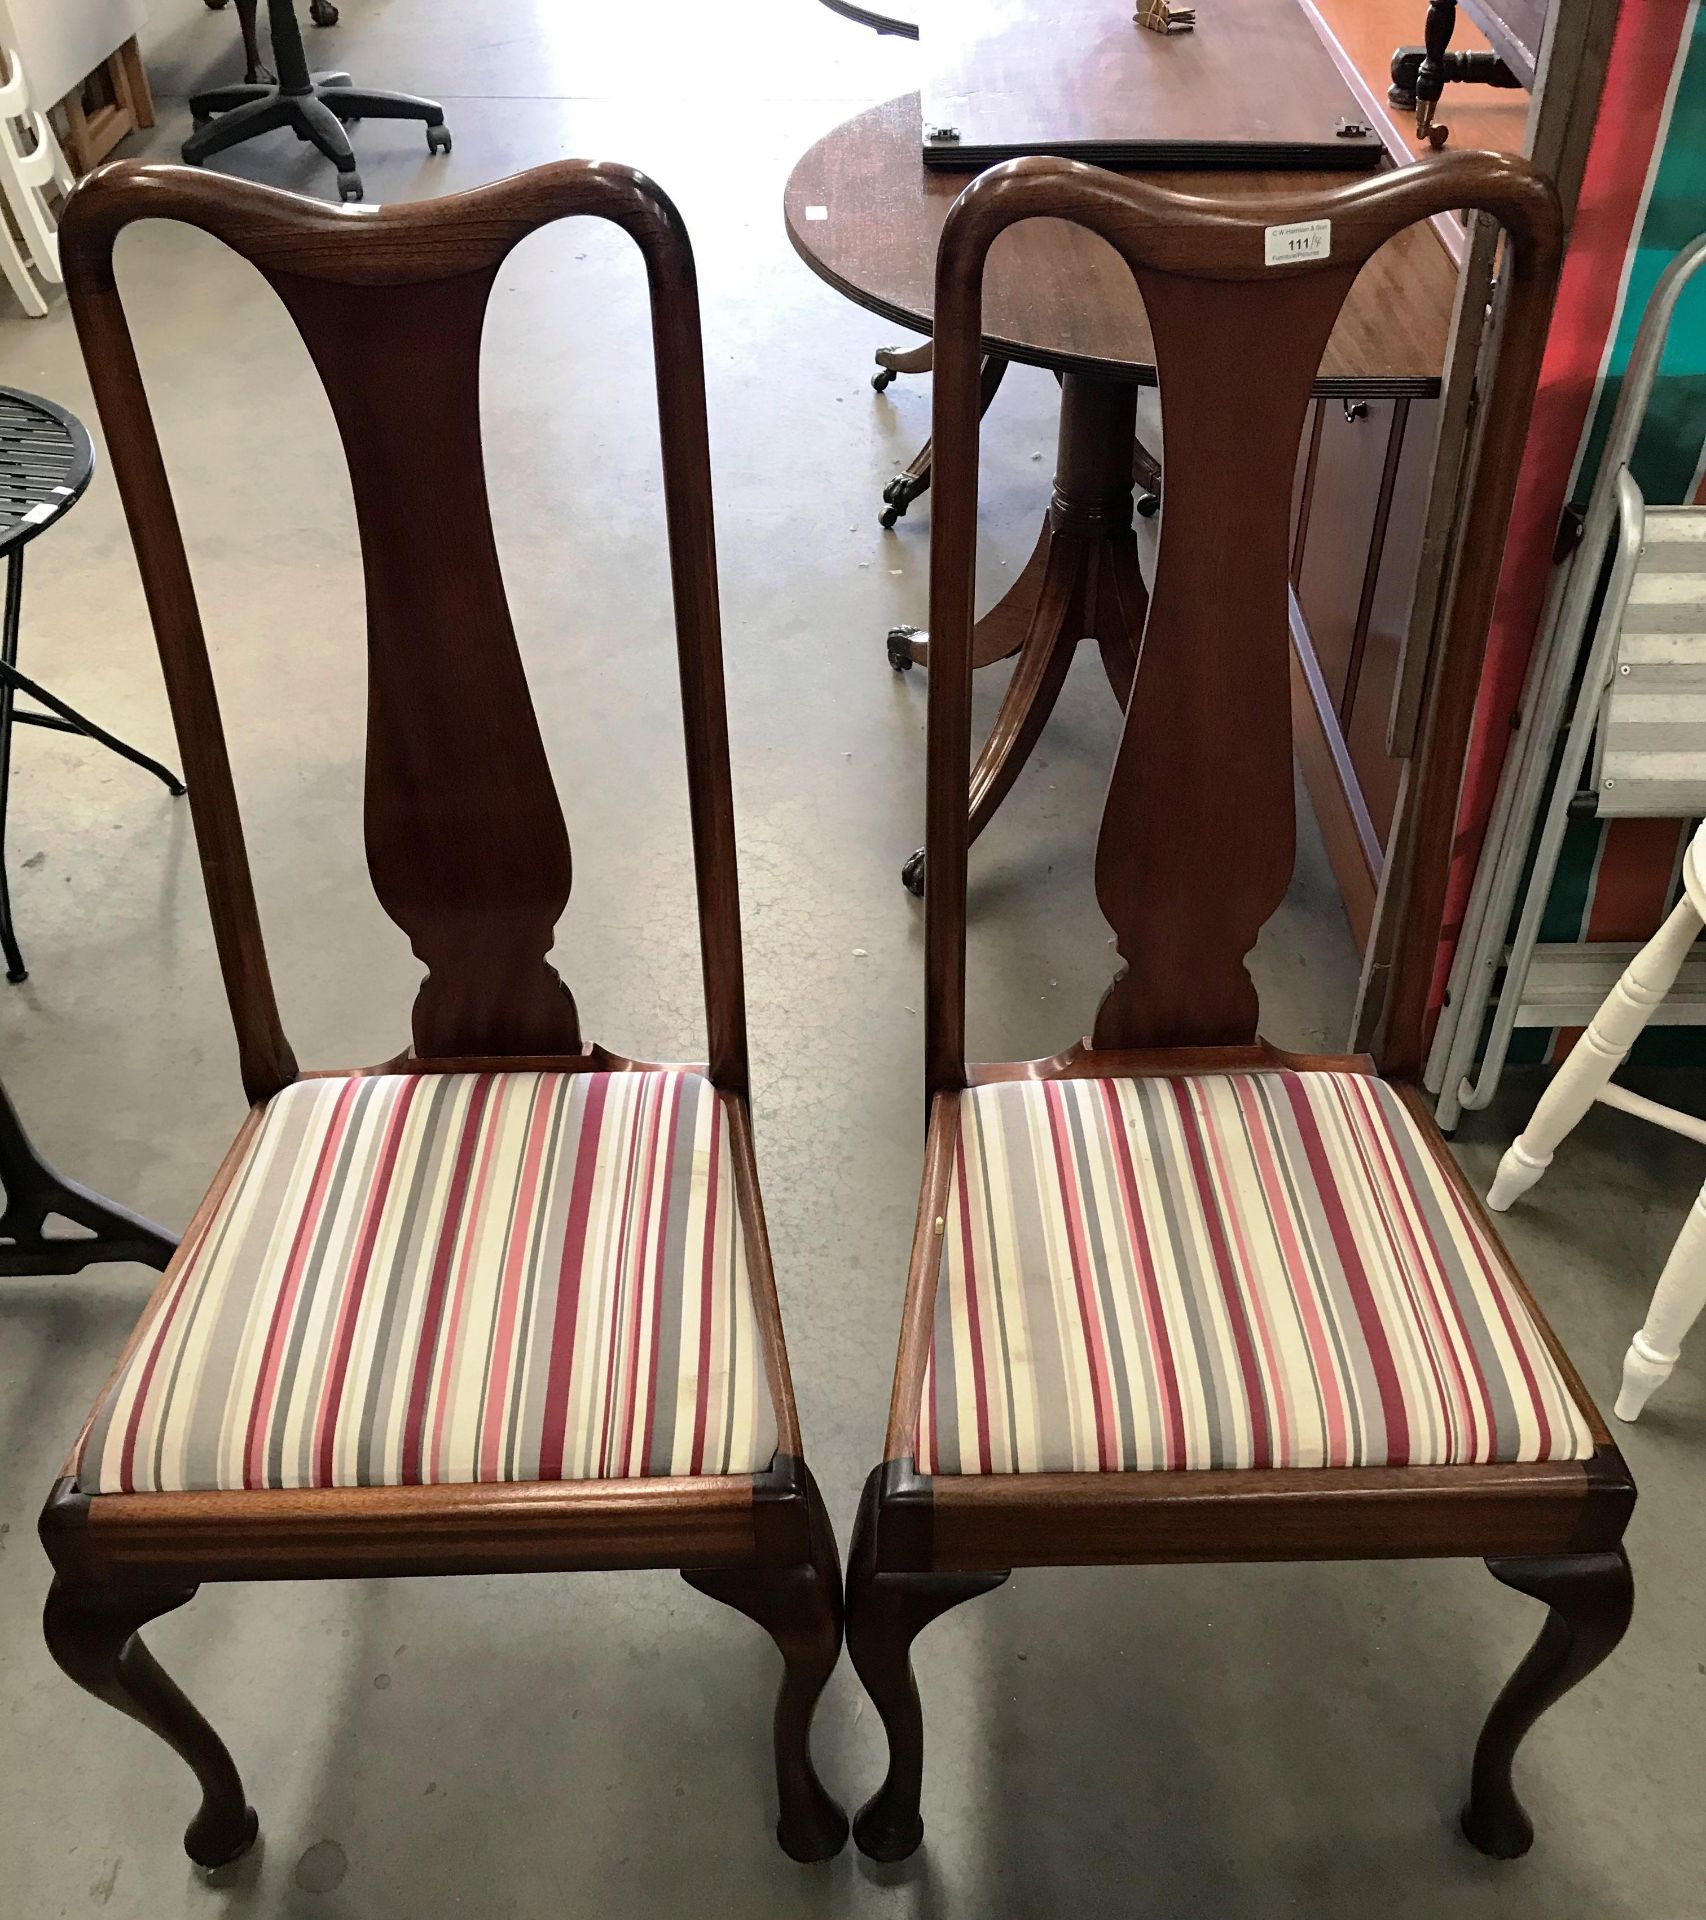 Four 1930s mahogany framed Queen Anne style dining chairs with grey/red and cream striped